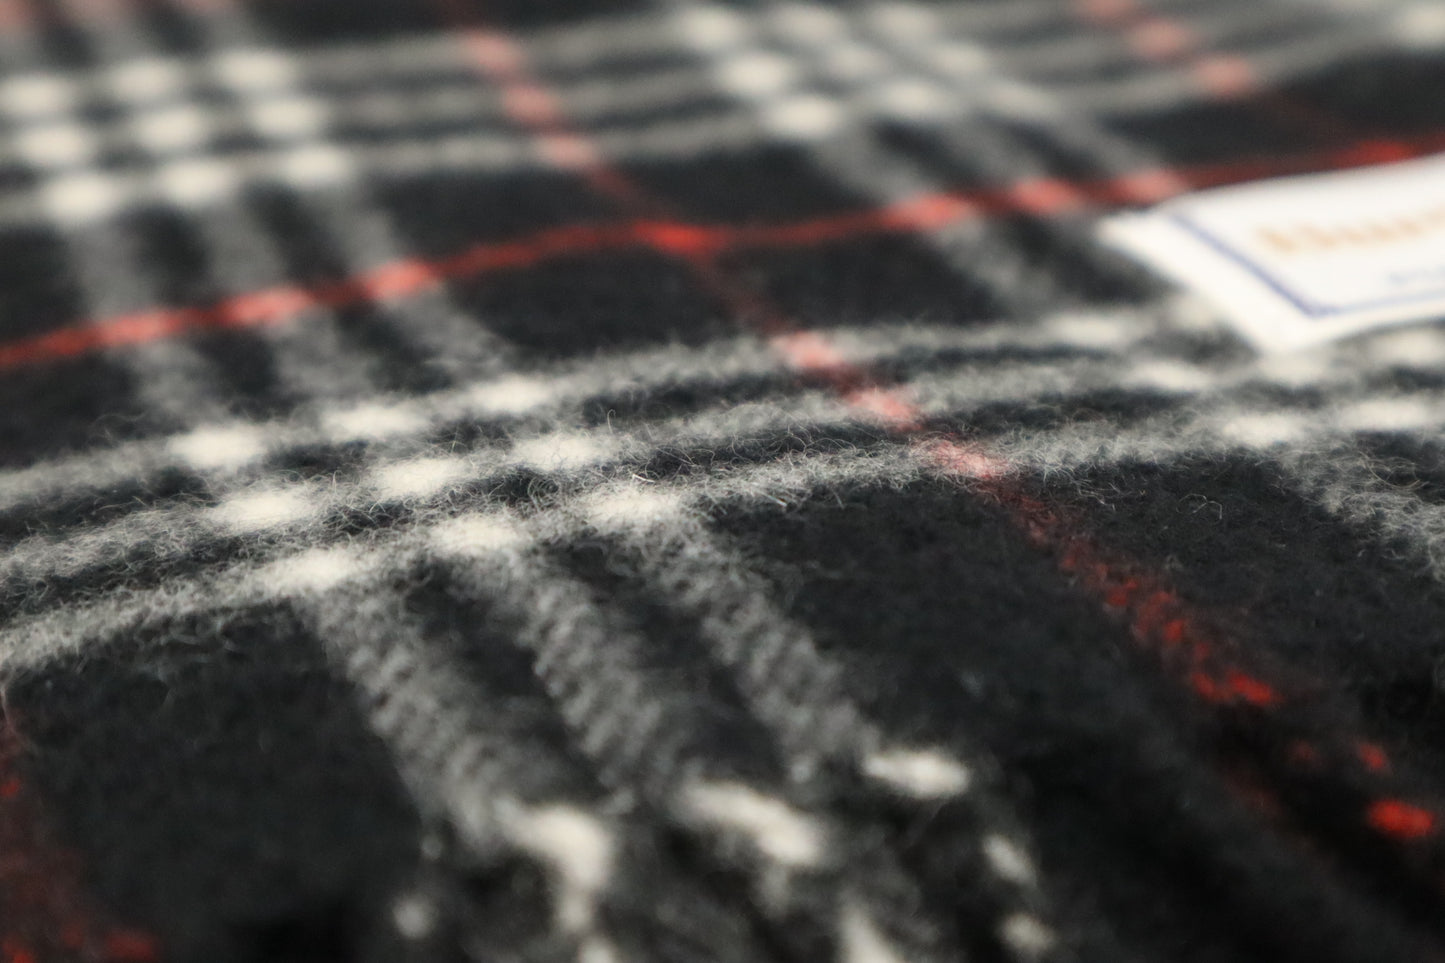 Burberry Scarf in Black Cashmere